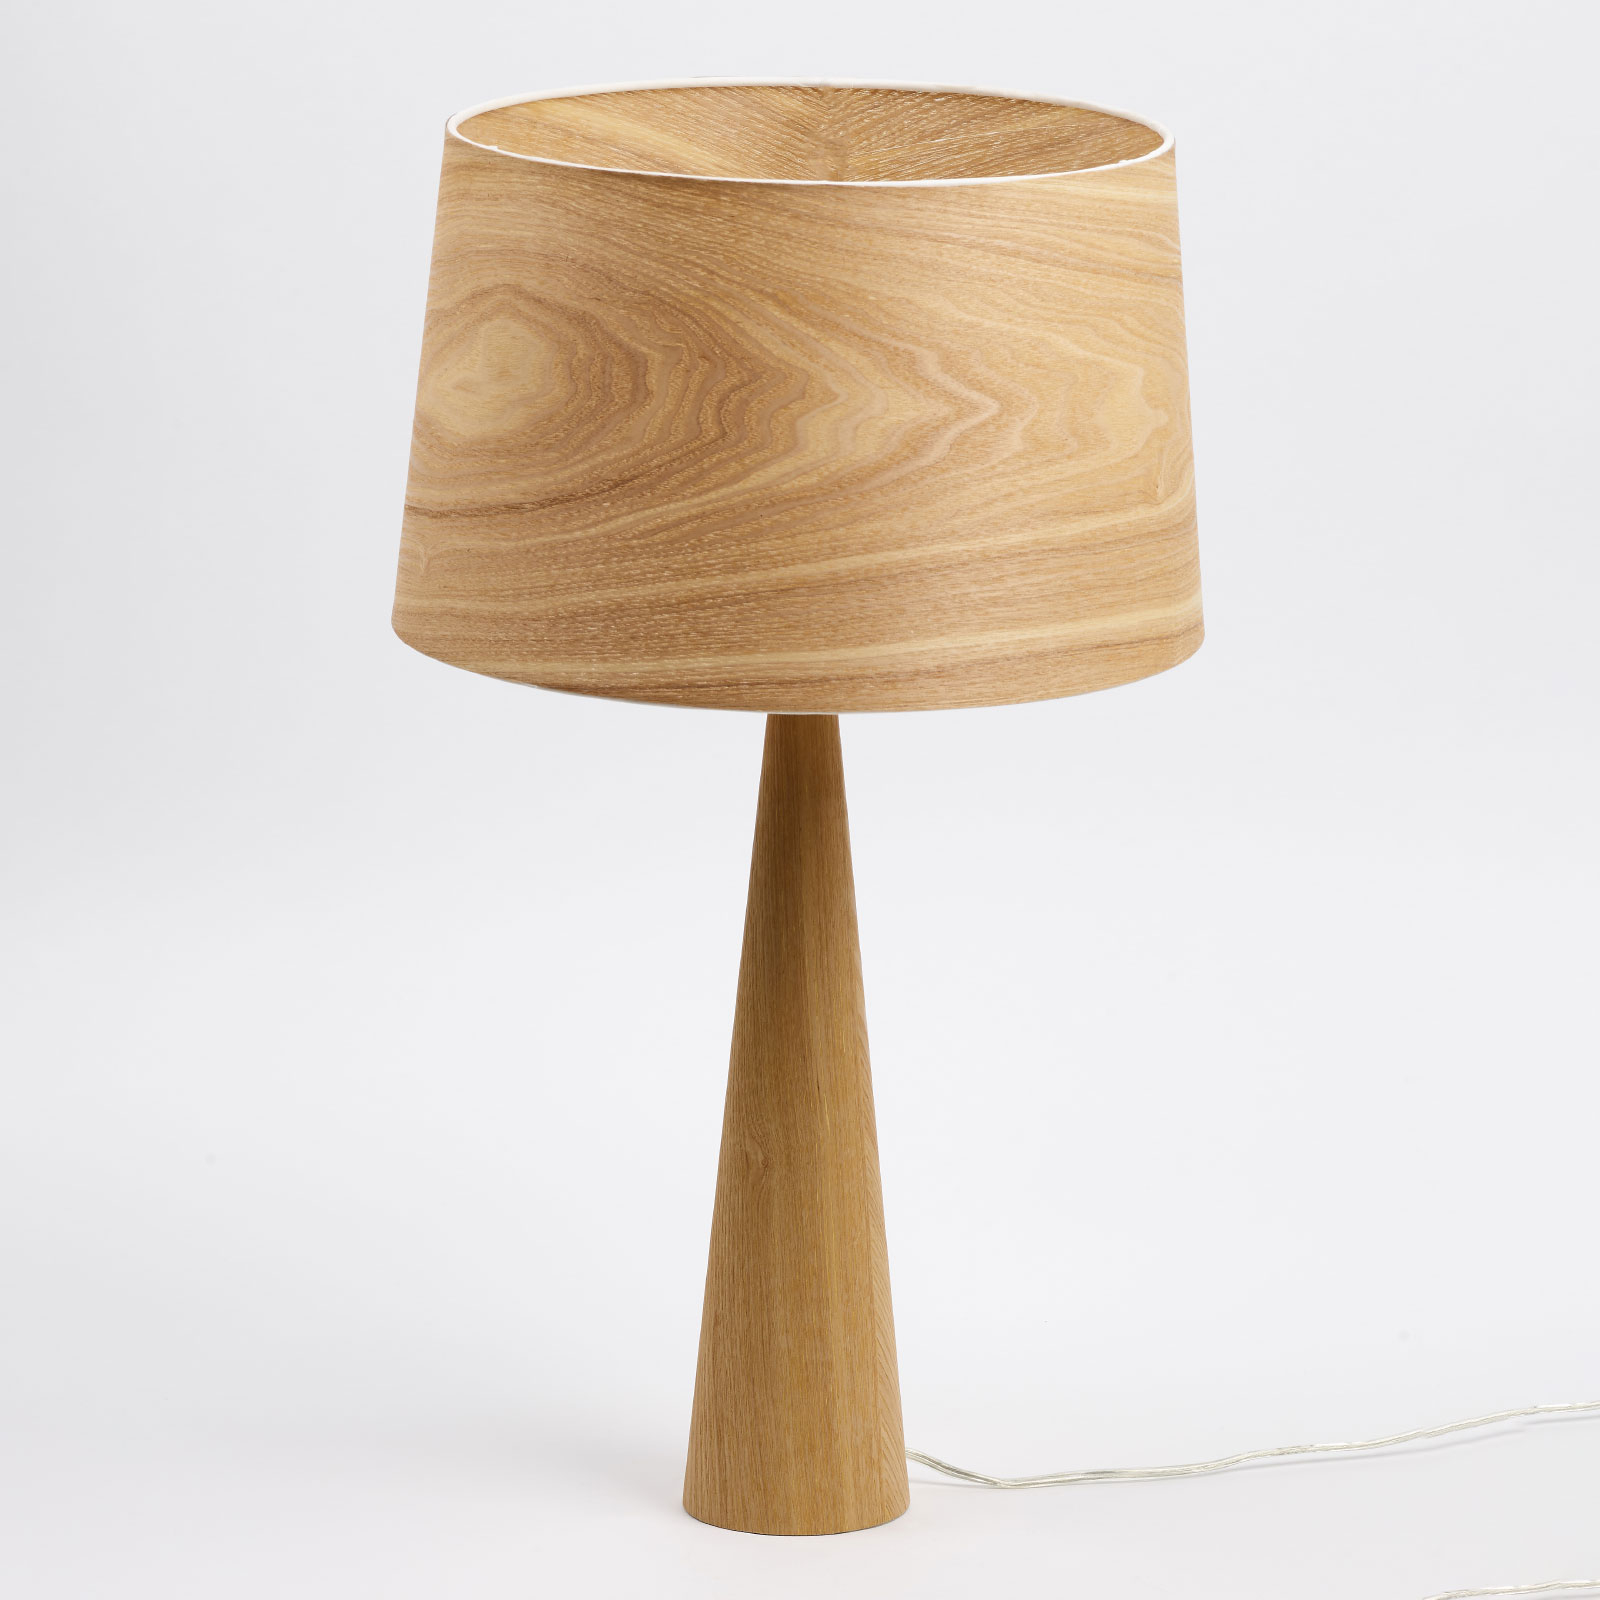 Totem LT table lamp in a natural wood look